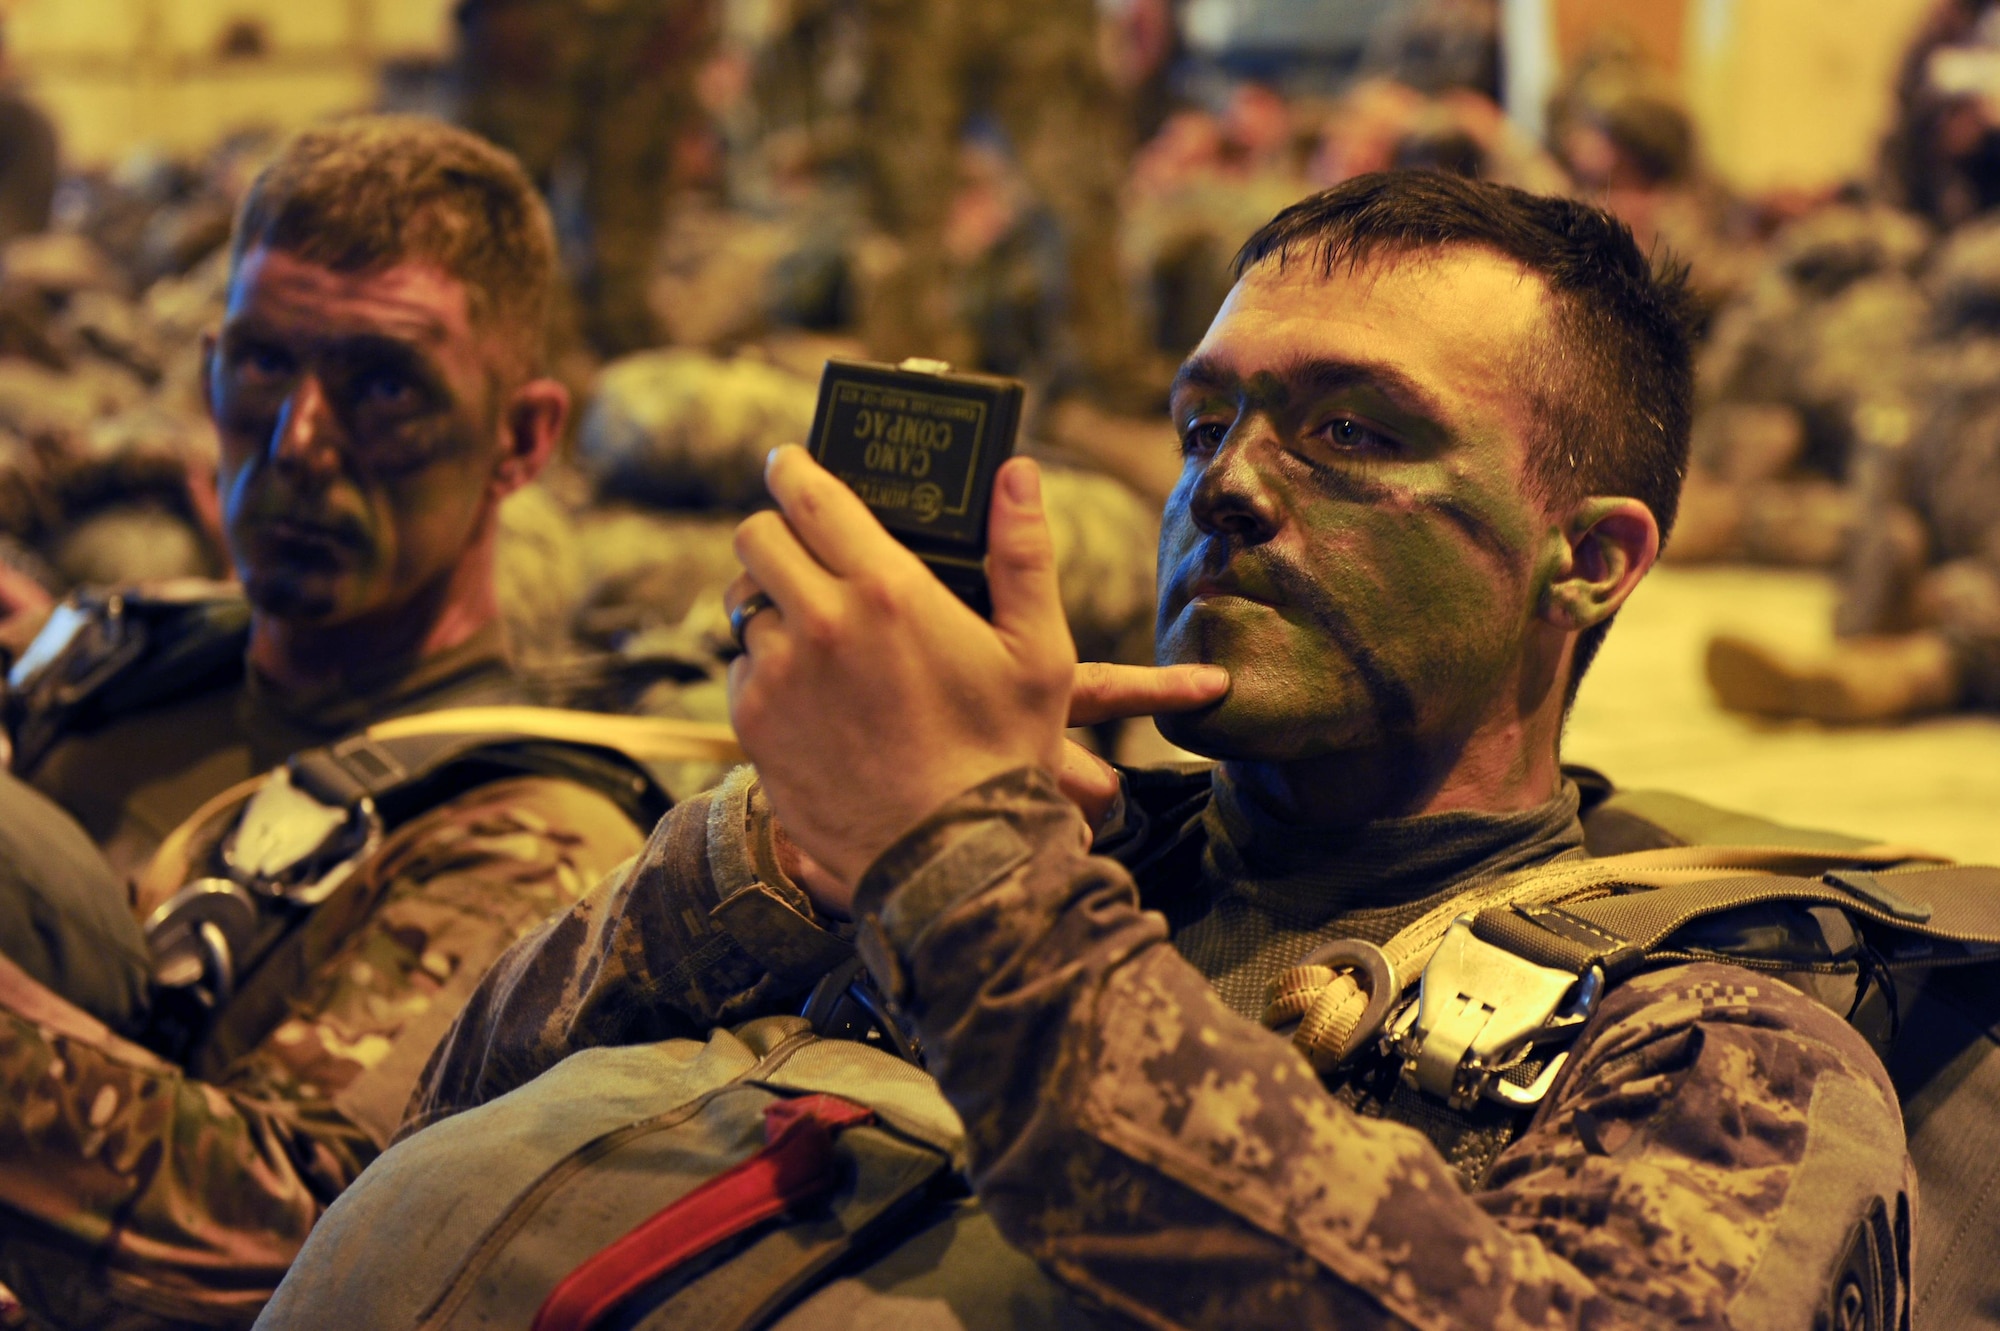 U.S. Army soldiers assigned to the 3rd Brigade Combat Team, 82nd Airborne Division from Fort Bragg, N.C., apply camouflage face paint in preparation for a static-line jump in support of Exercise Green Flag Little Rock 16-09 Aug. 18, 2016, near Fort Polk, La. Camouflage face paint is used to protect personnel from observation by enemy forces in a forest environment. (U.S. Air Force photo by Airman Kevin Sommer Giron)